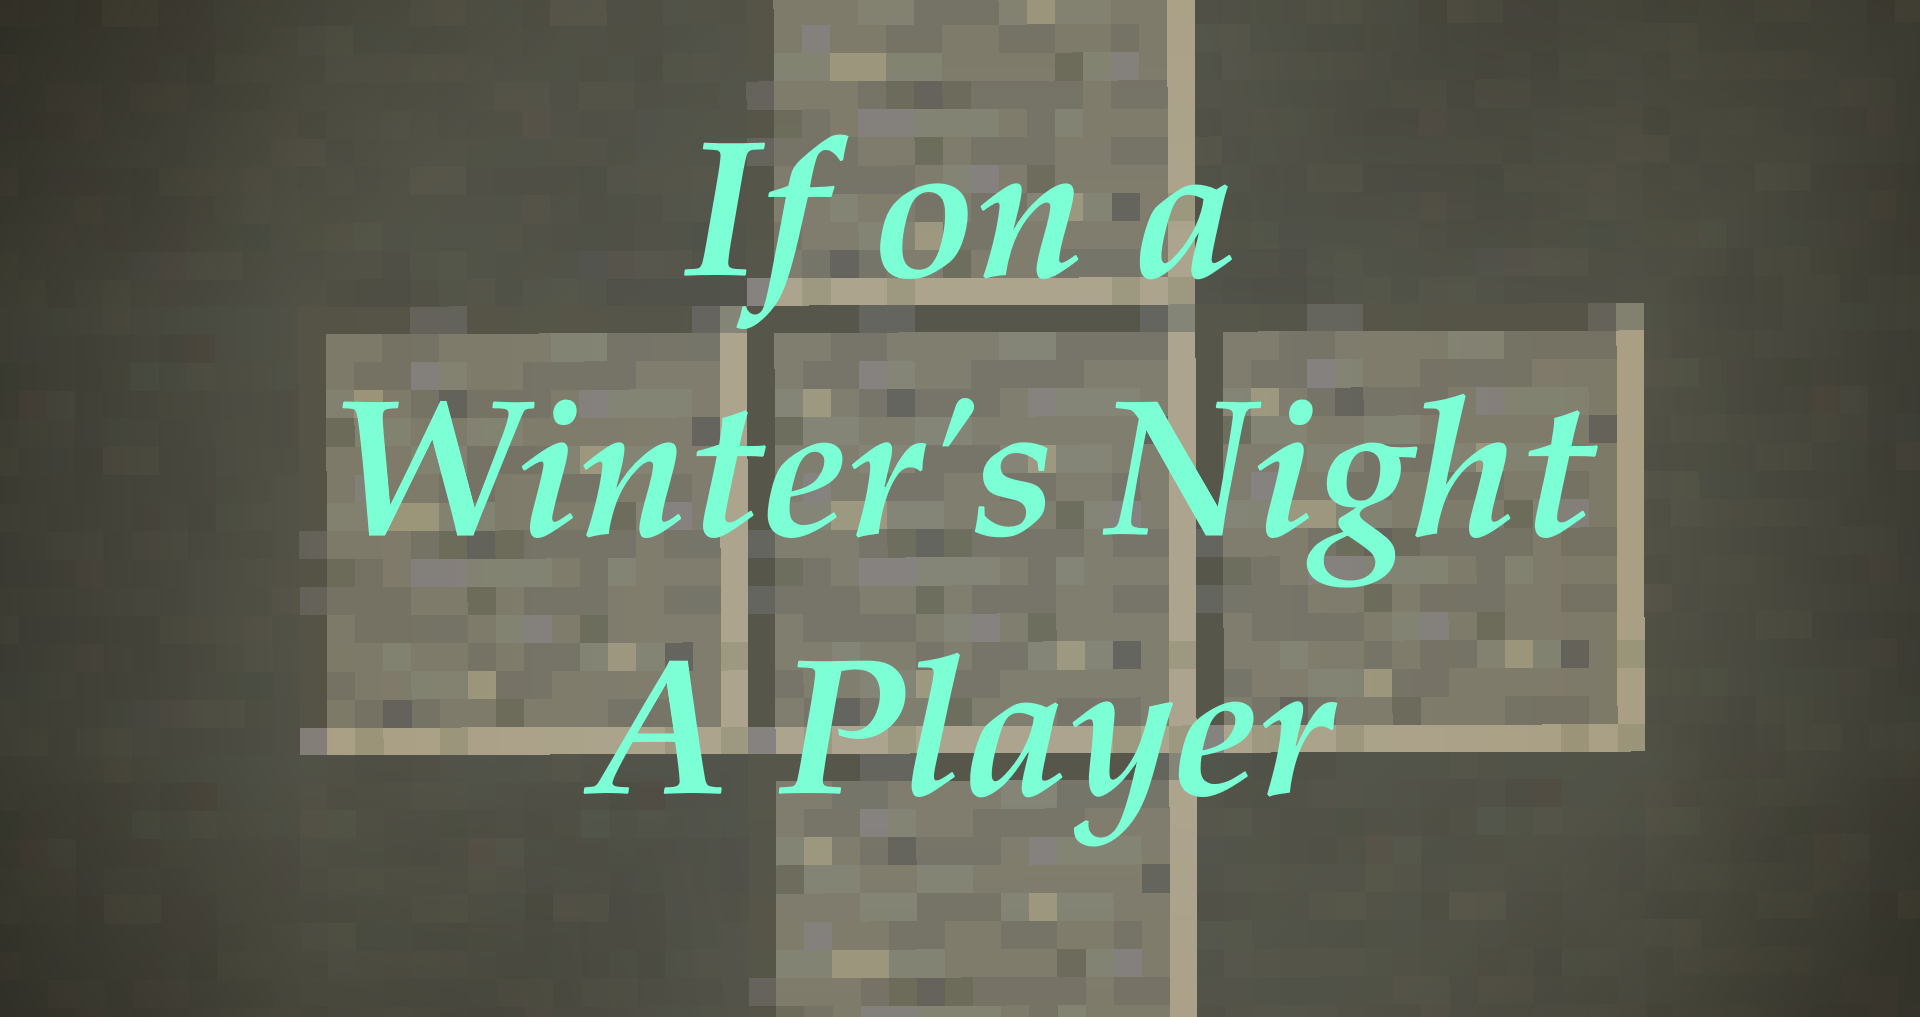 Télécharger If On a Winter's Night a Player pour Minecraft 1.16.5